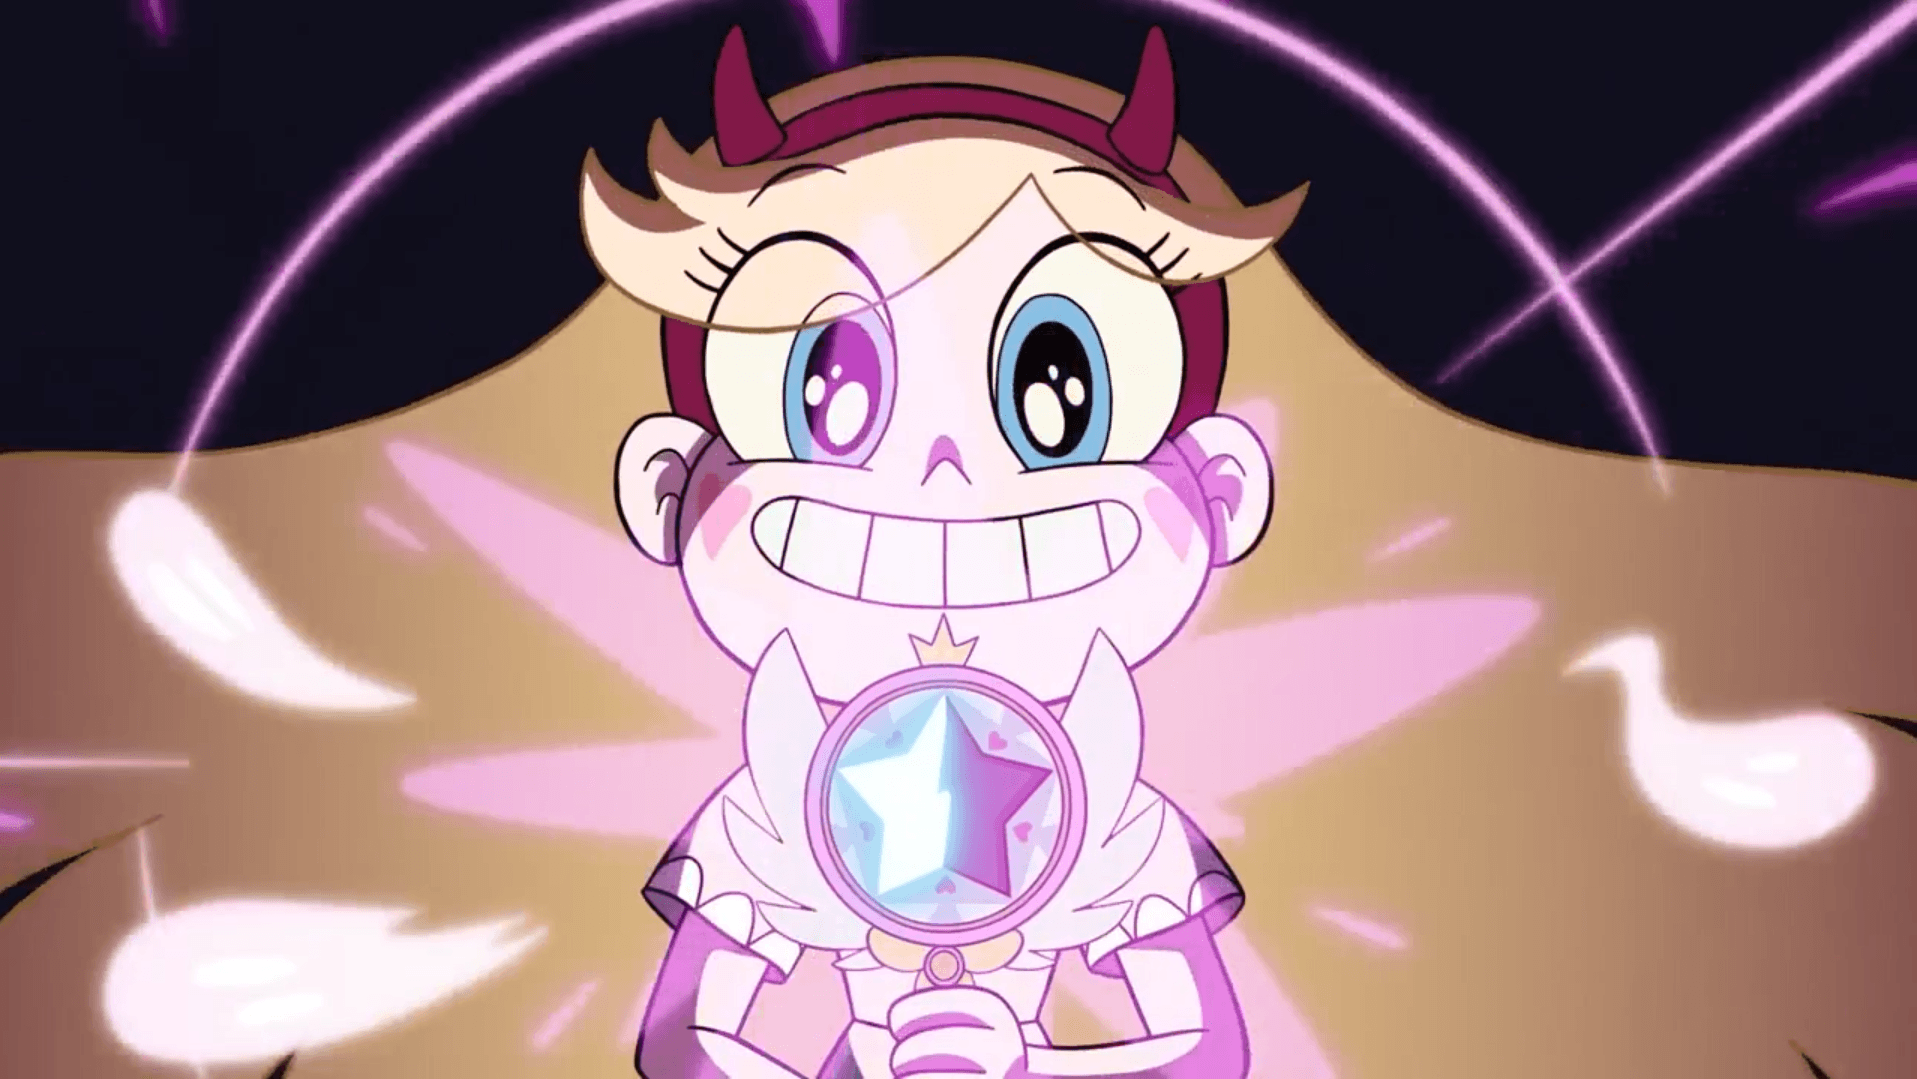 Star Vs The Forces Of Evil Wallpaper Post Cleaved Spoilers